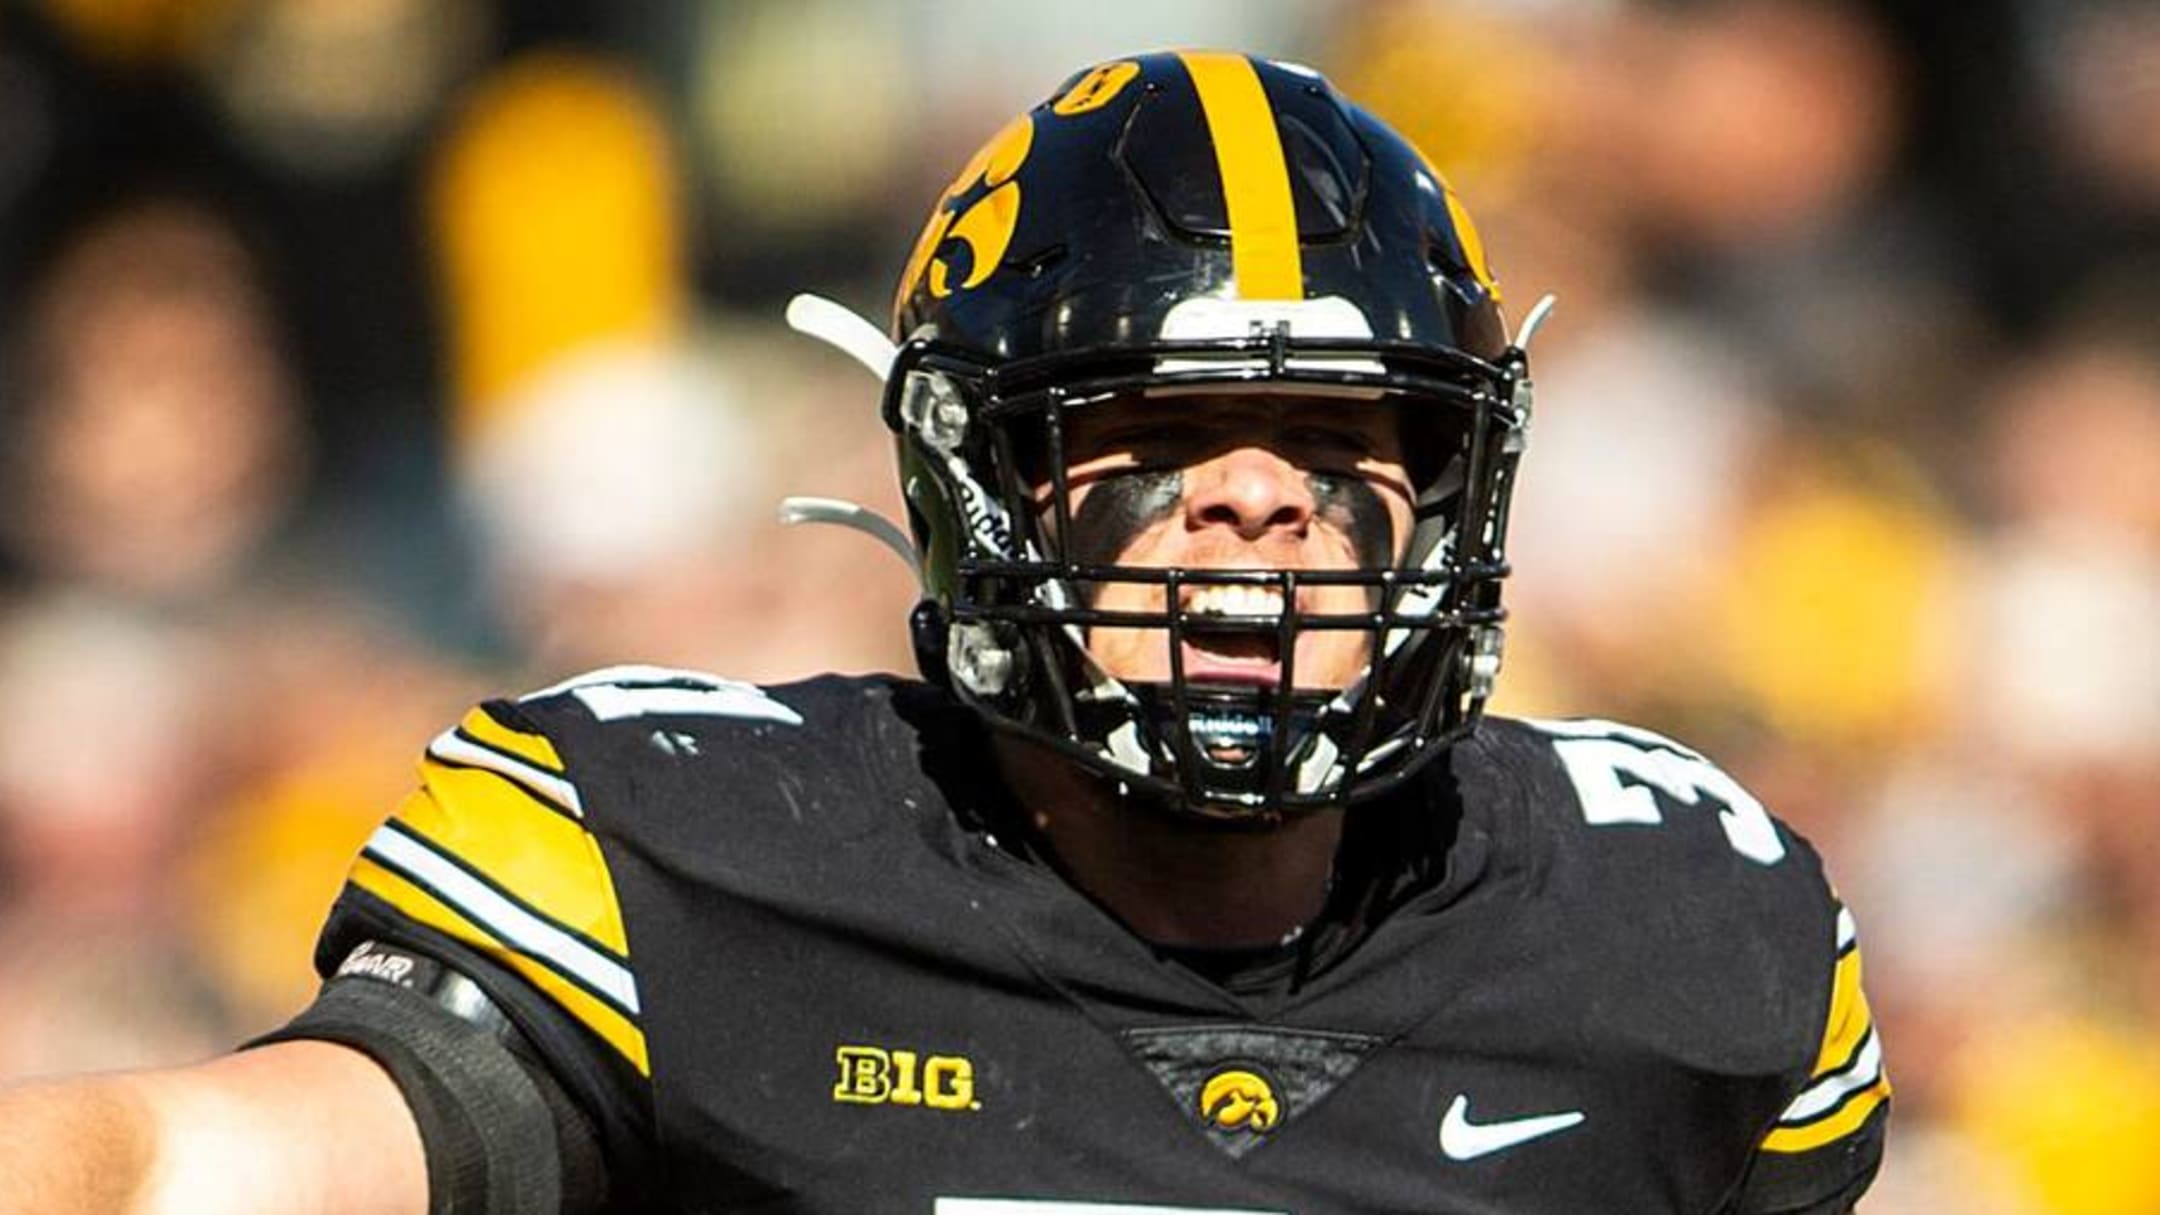 More honors for Hawkeyes' Campbell